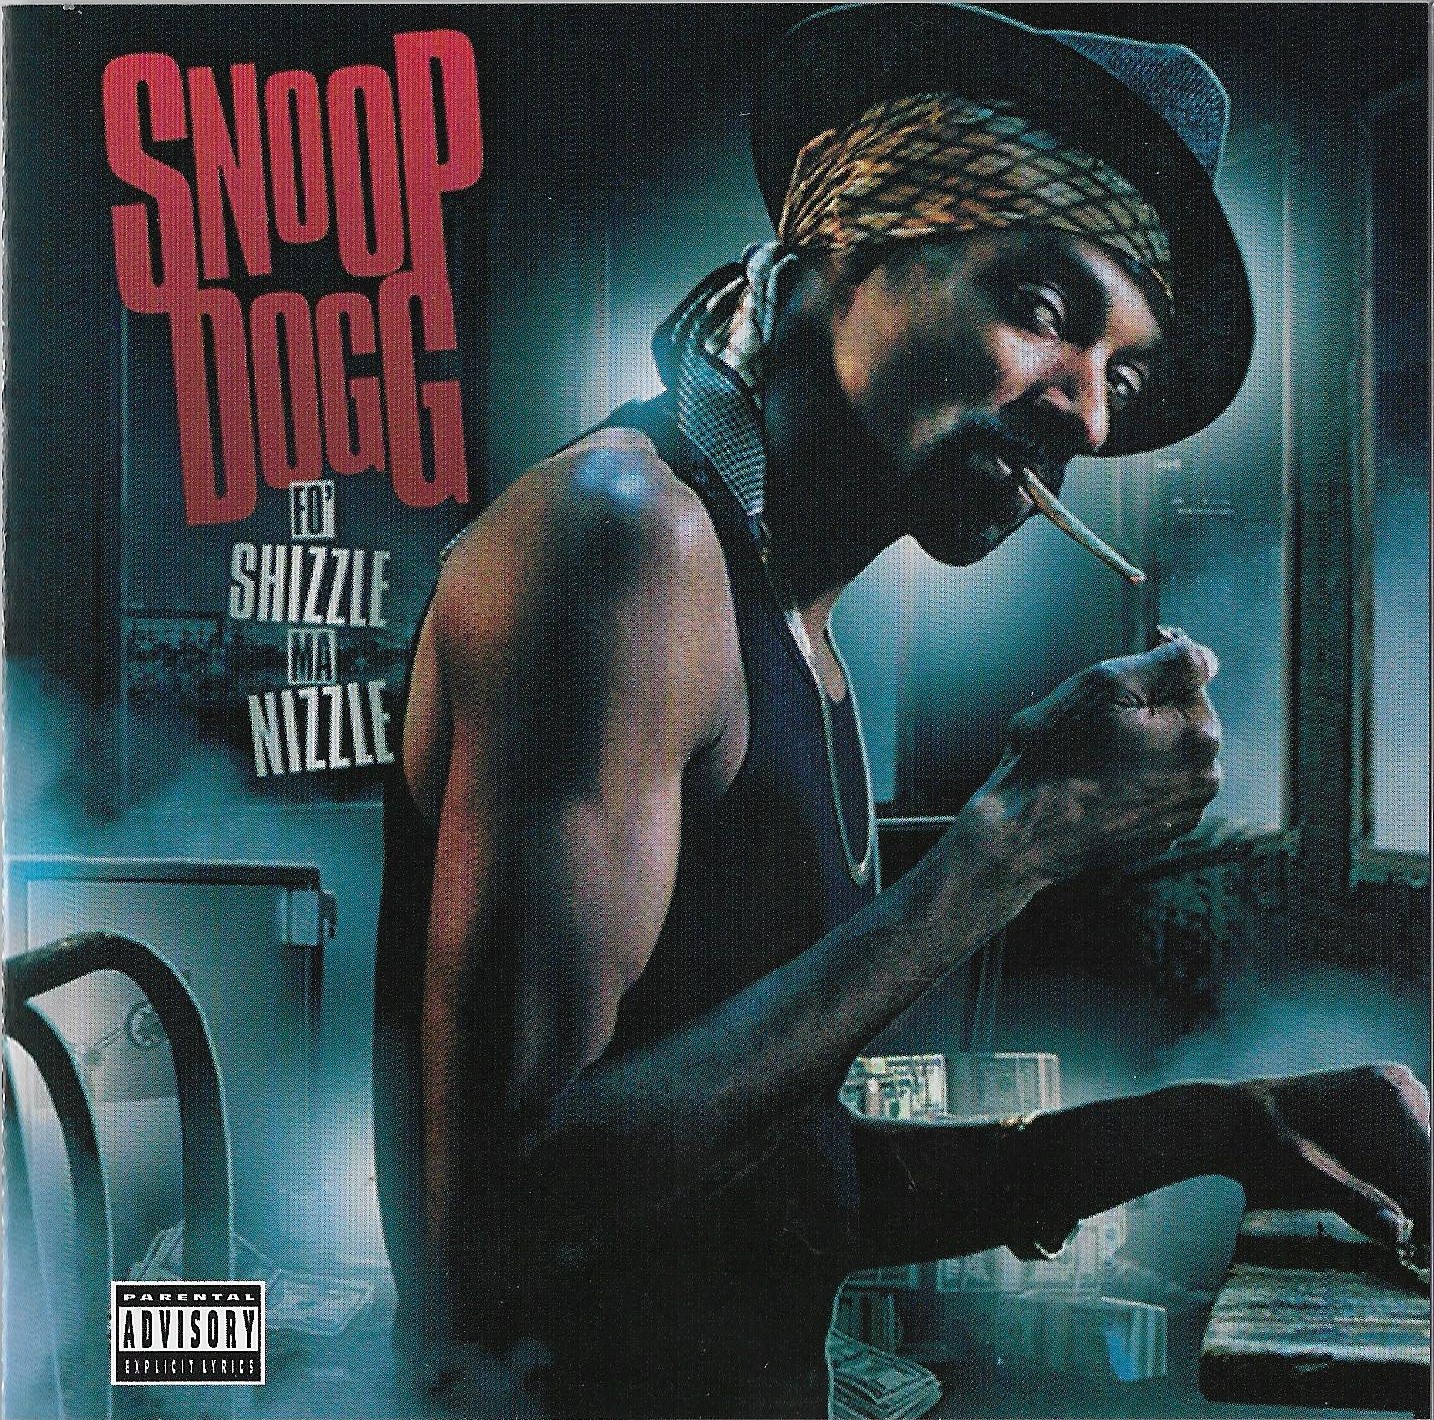 Snoop dogg fo shizzle my nizzle song